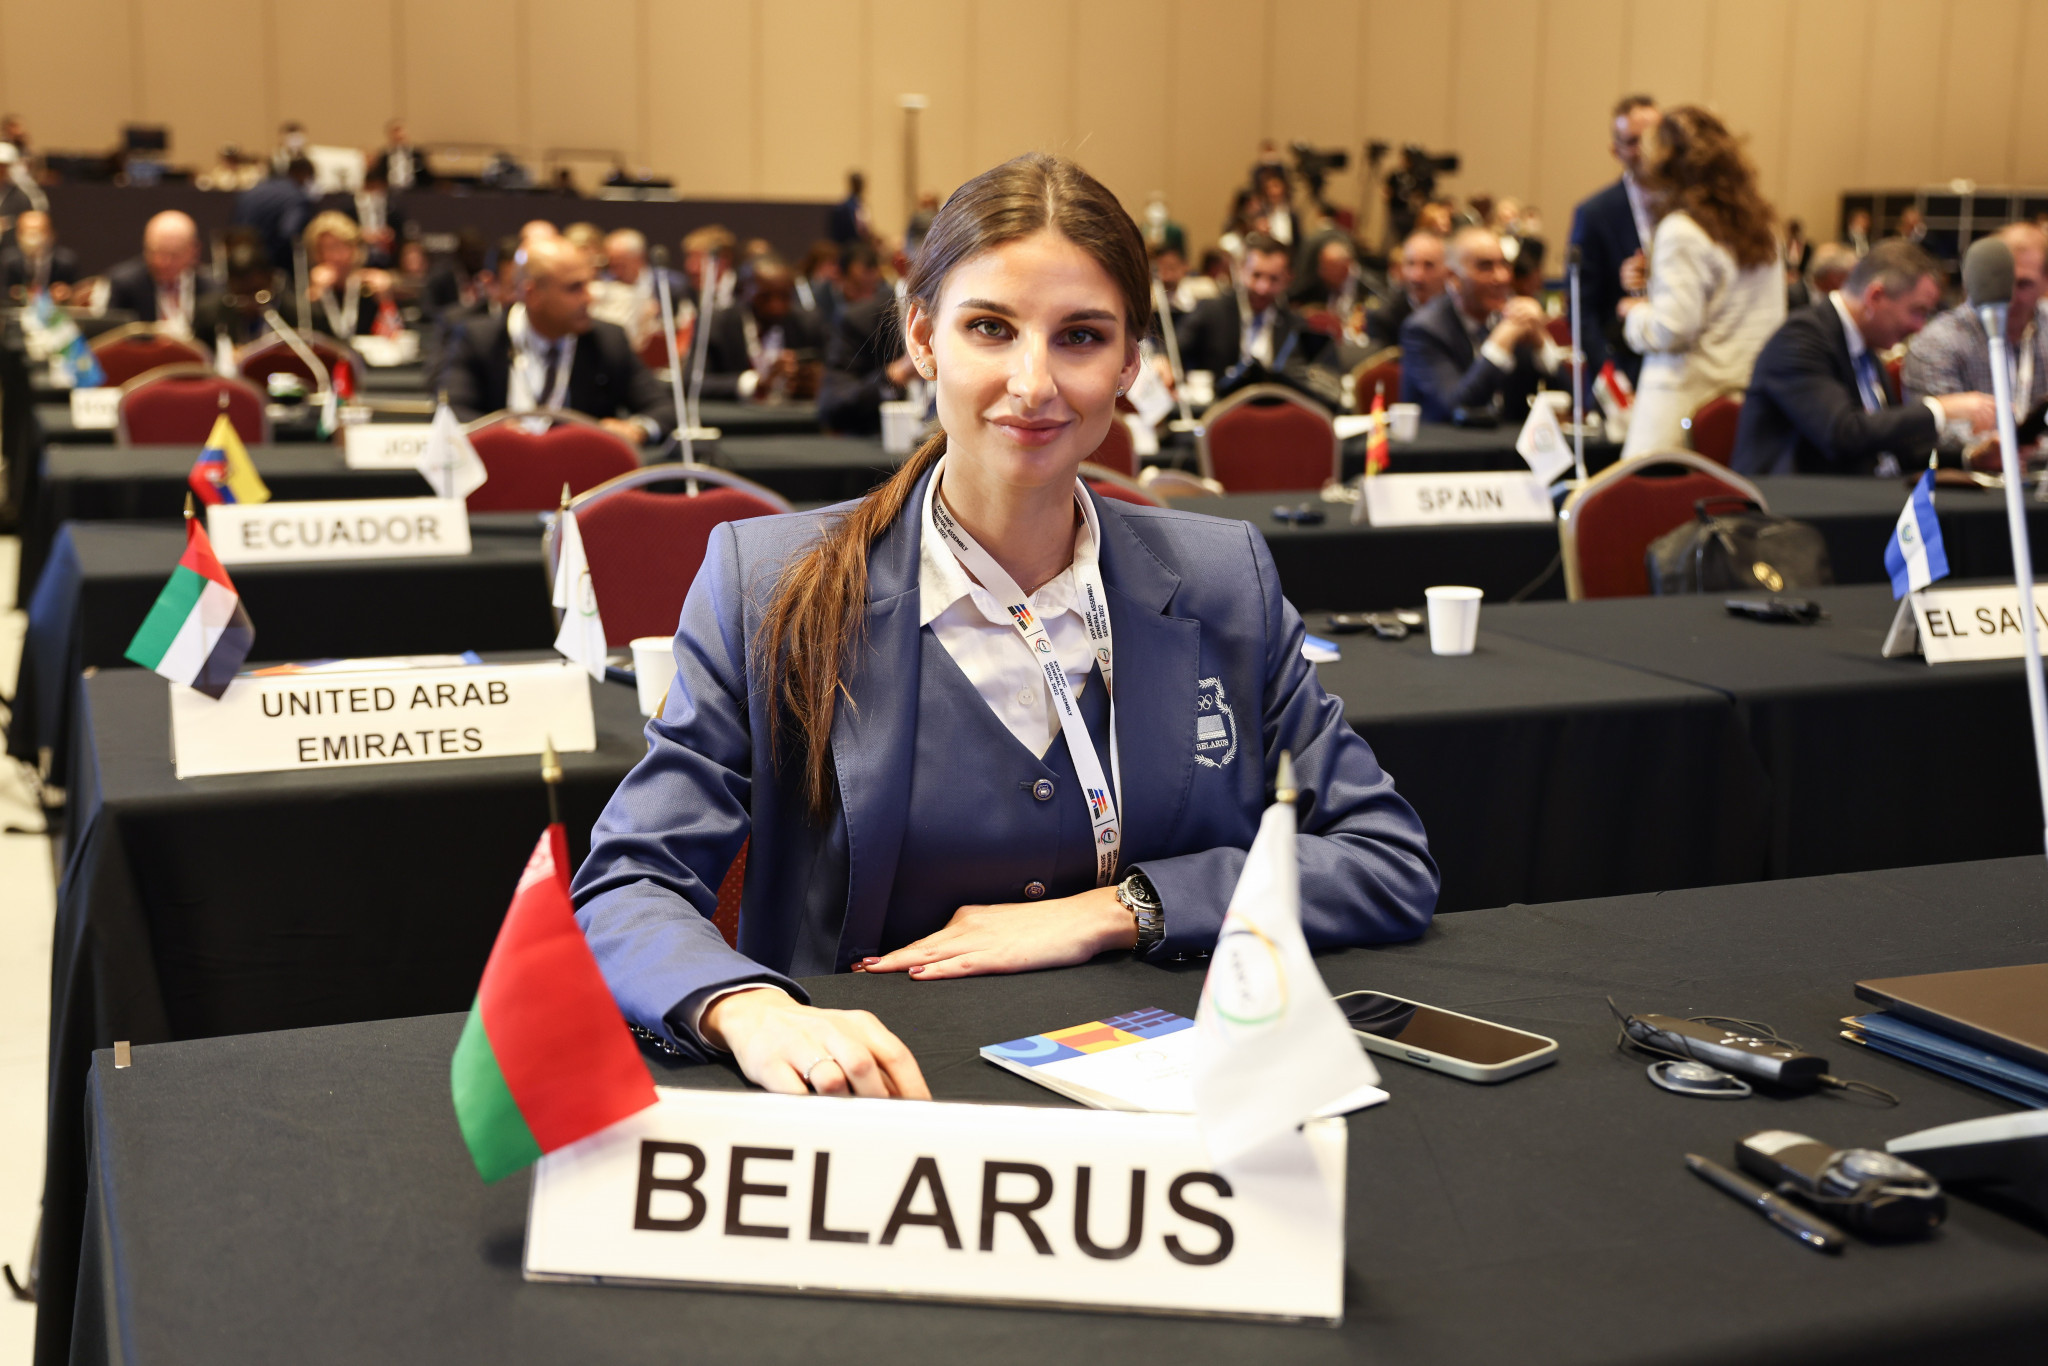 The NOC of the Republic of Belarus is in attendance, represented by secretary general Ksenia Sankovich ©ANOC